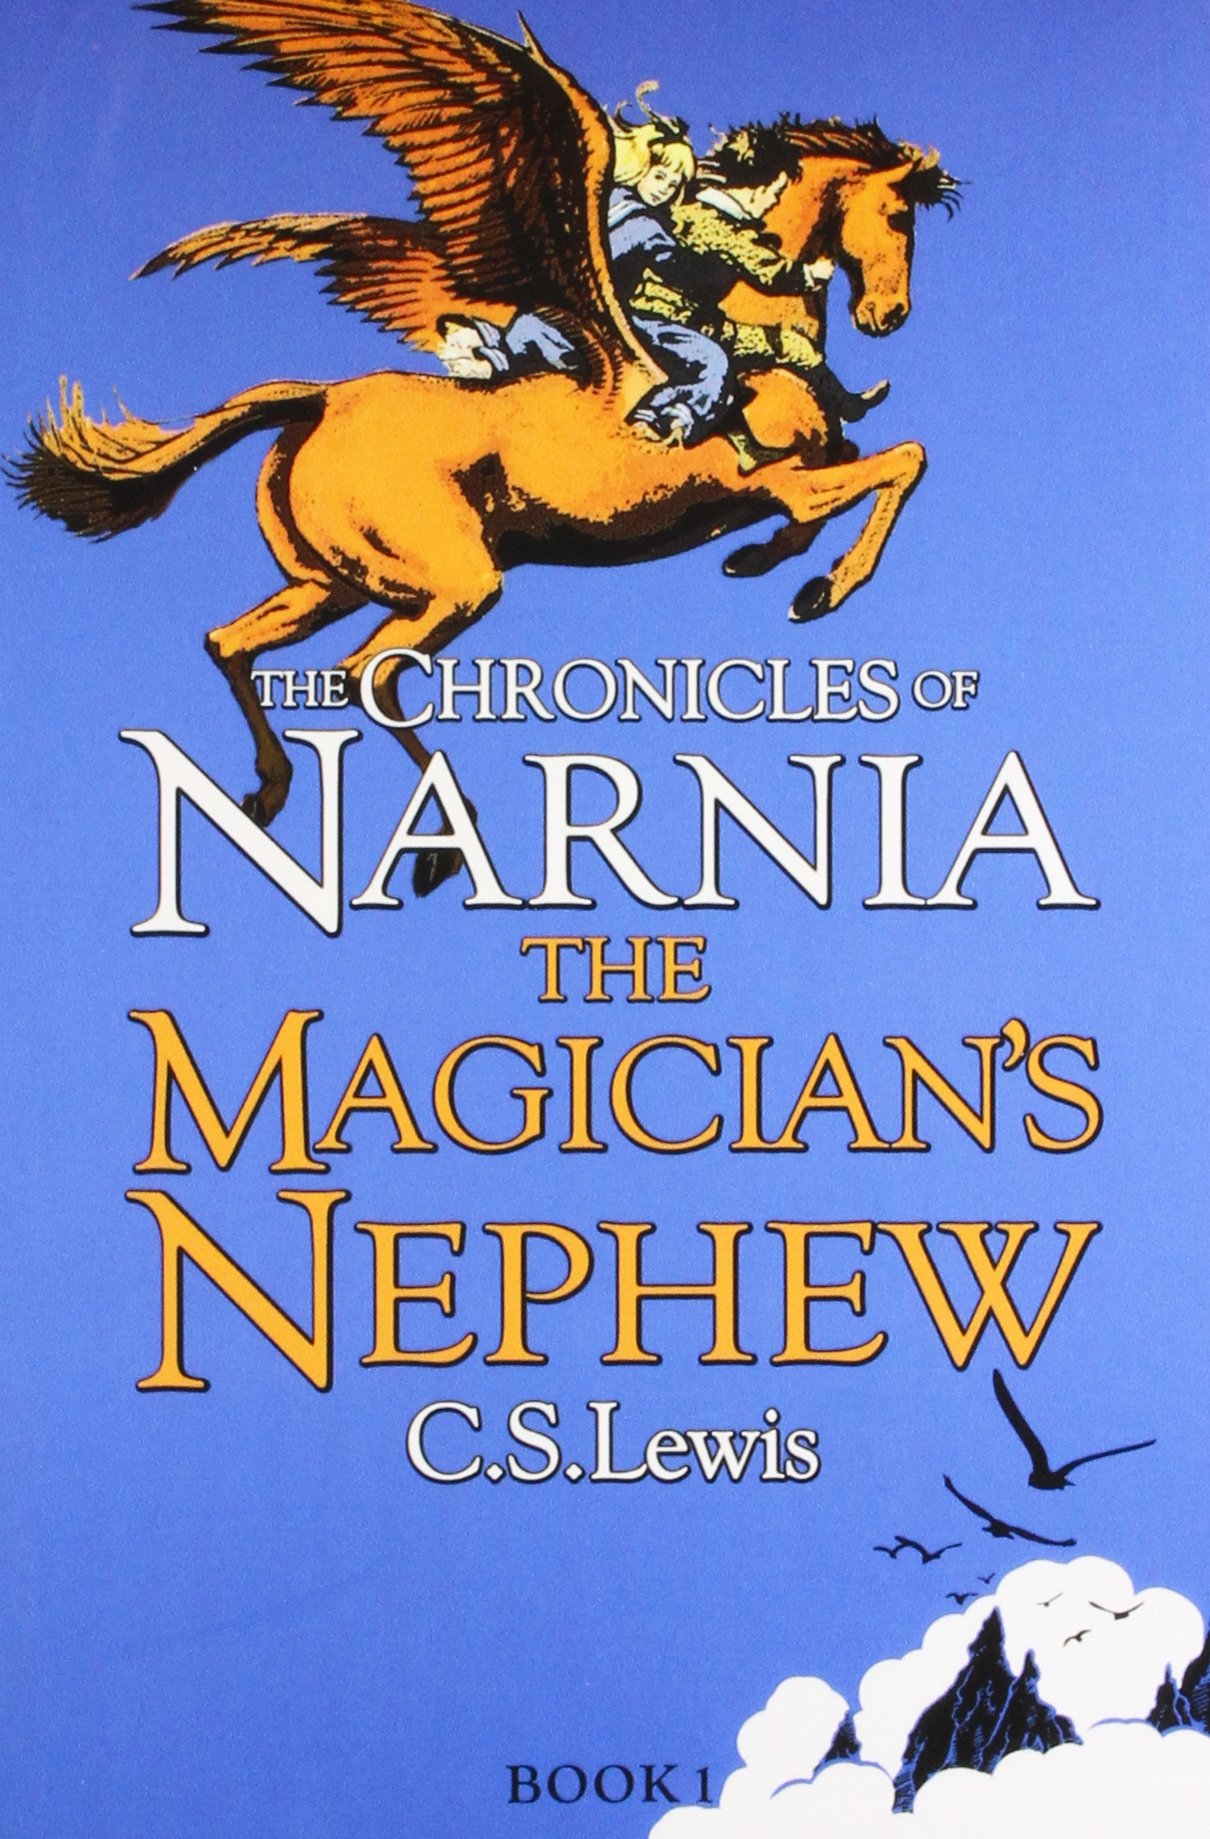 The Chronicles of Narnia : The Magician's Nephew